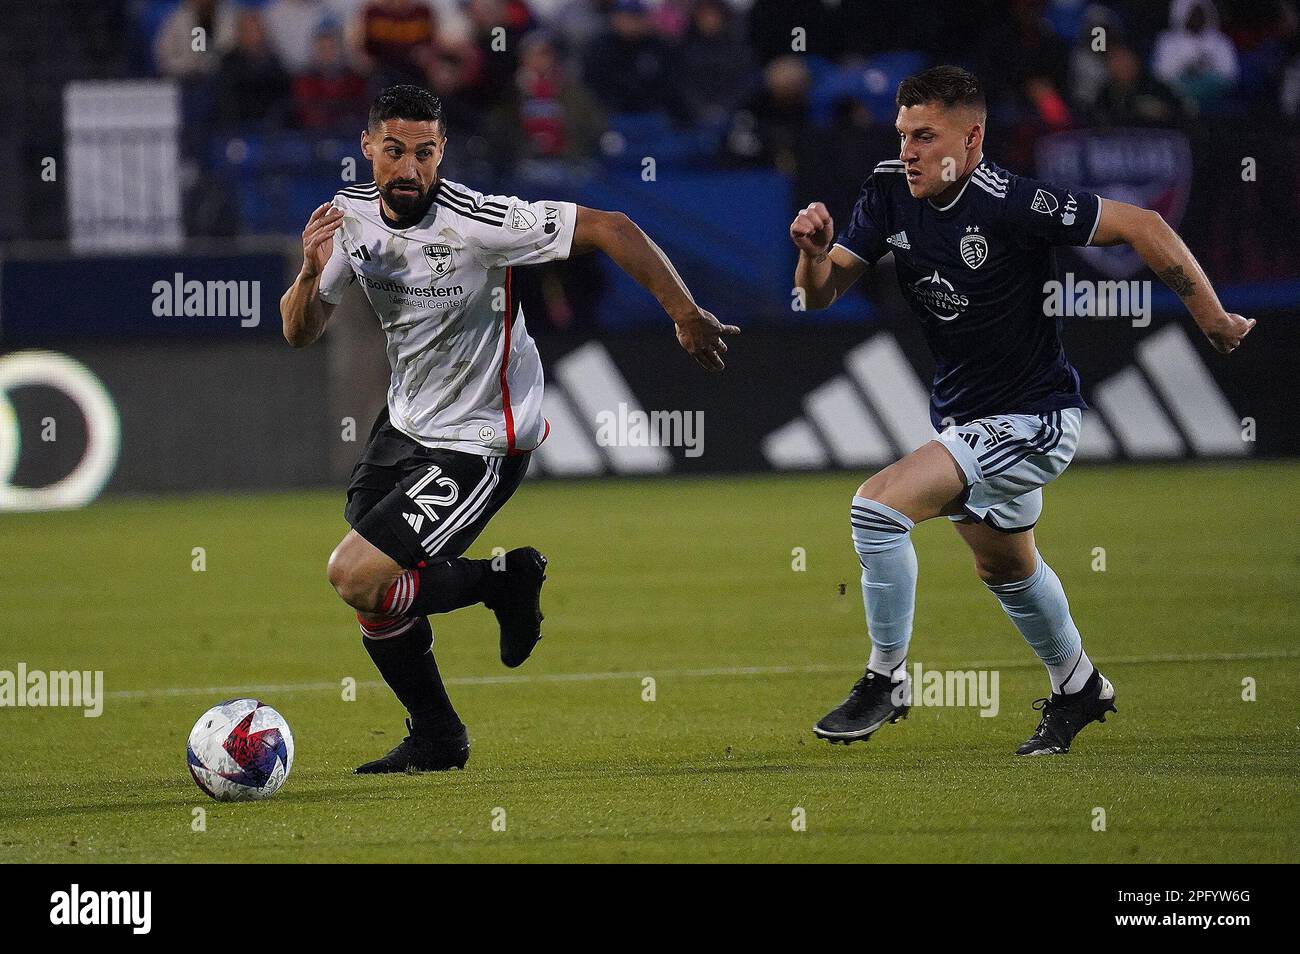 Frisco, United States. 18th Mar, 2023. March 18, 2023, Frisco, United States: FC Dallas midfielder Sebastian Lletget is chased by Sporting KC midfielder Remi Walter during first half action of the MLS game between FC Dallas and Sporting KC at Toyota Stadium on March 18, 2023 in Frisco, Texas. (Photo by Javier Vicencio/ Credit: Eyepix Group/Alamy Live News Stock Photo